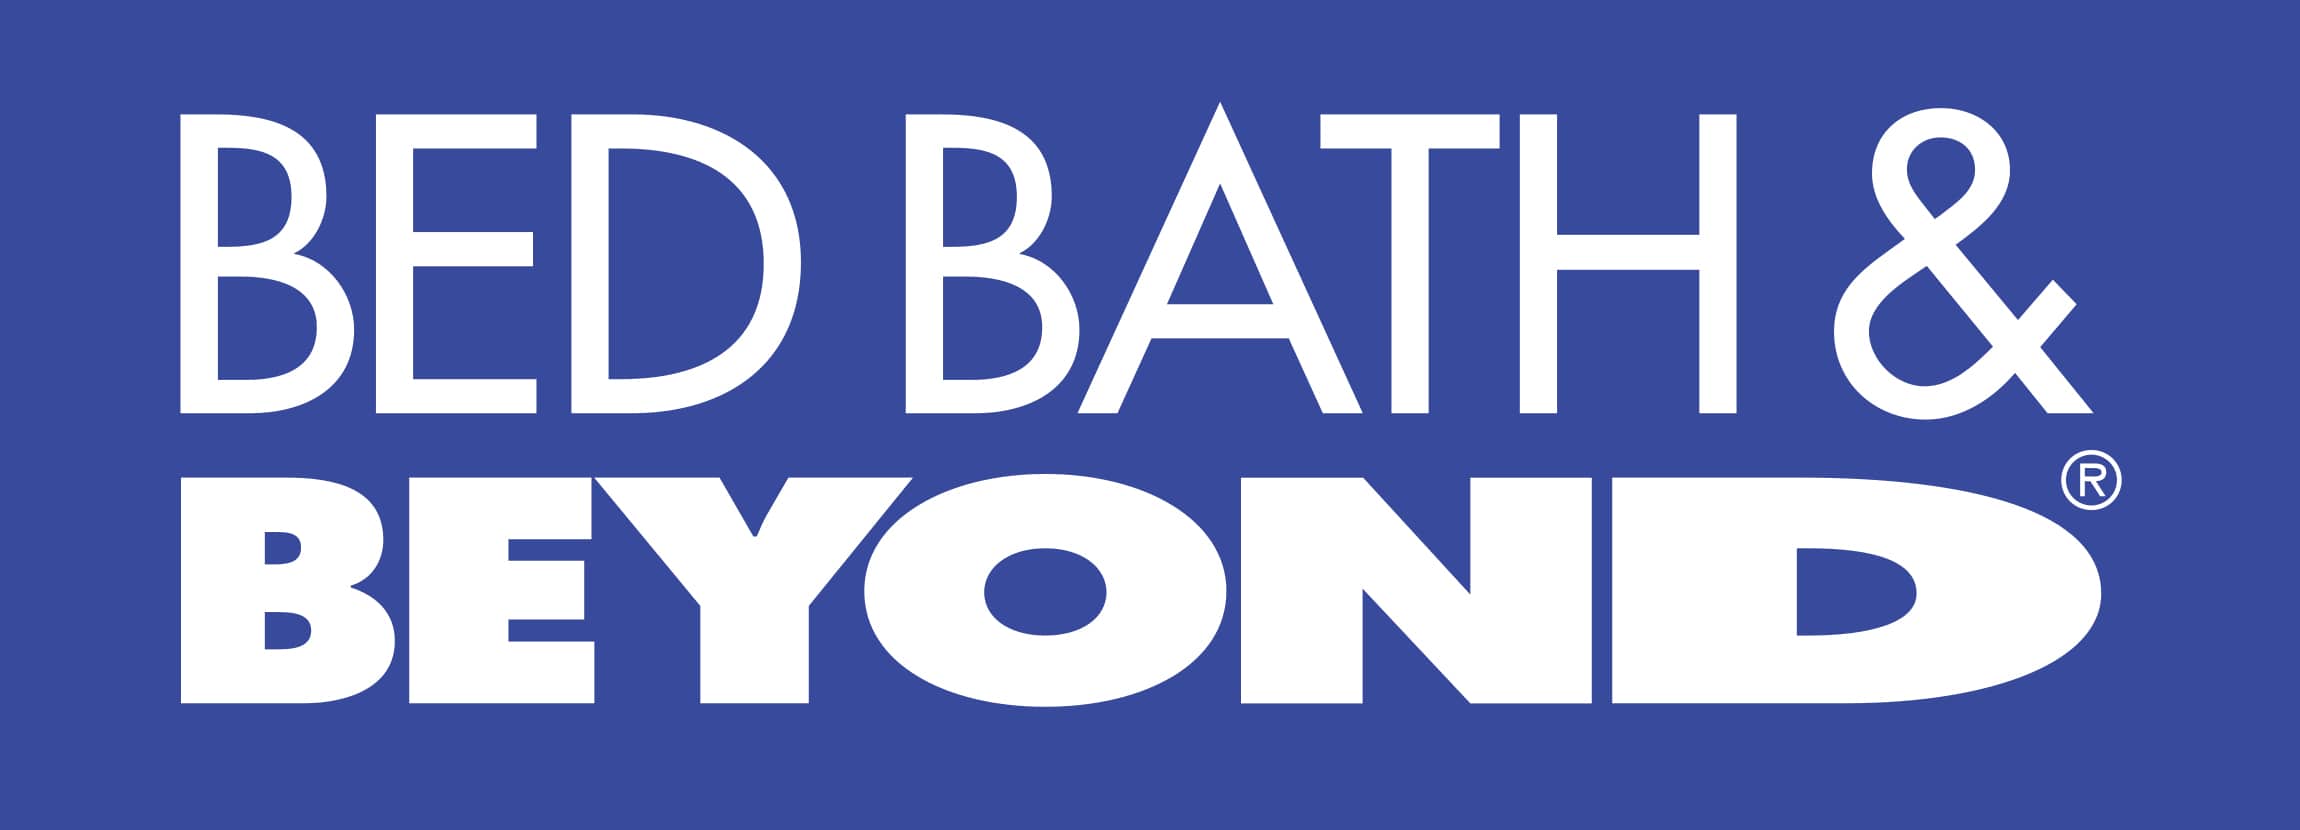 bed-bath-beyond-online-sales-increase-85-some-stores-converted-to